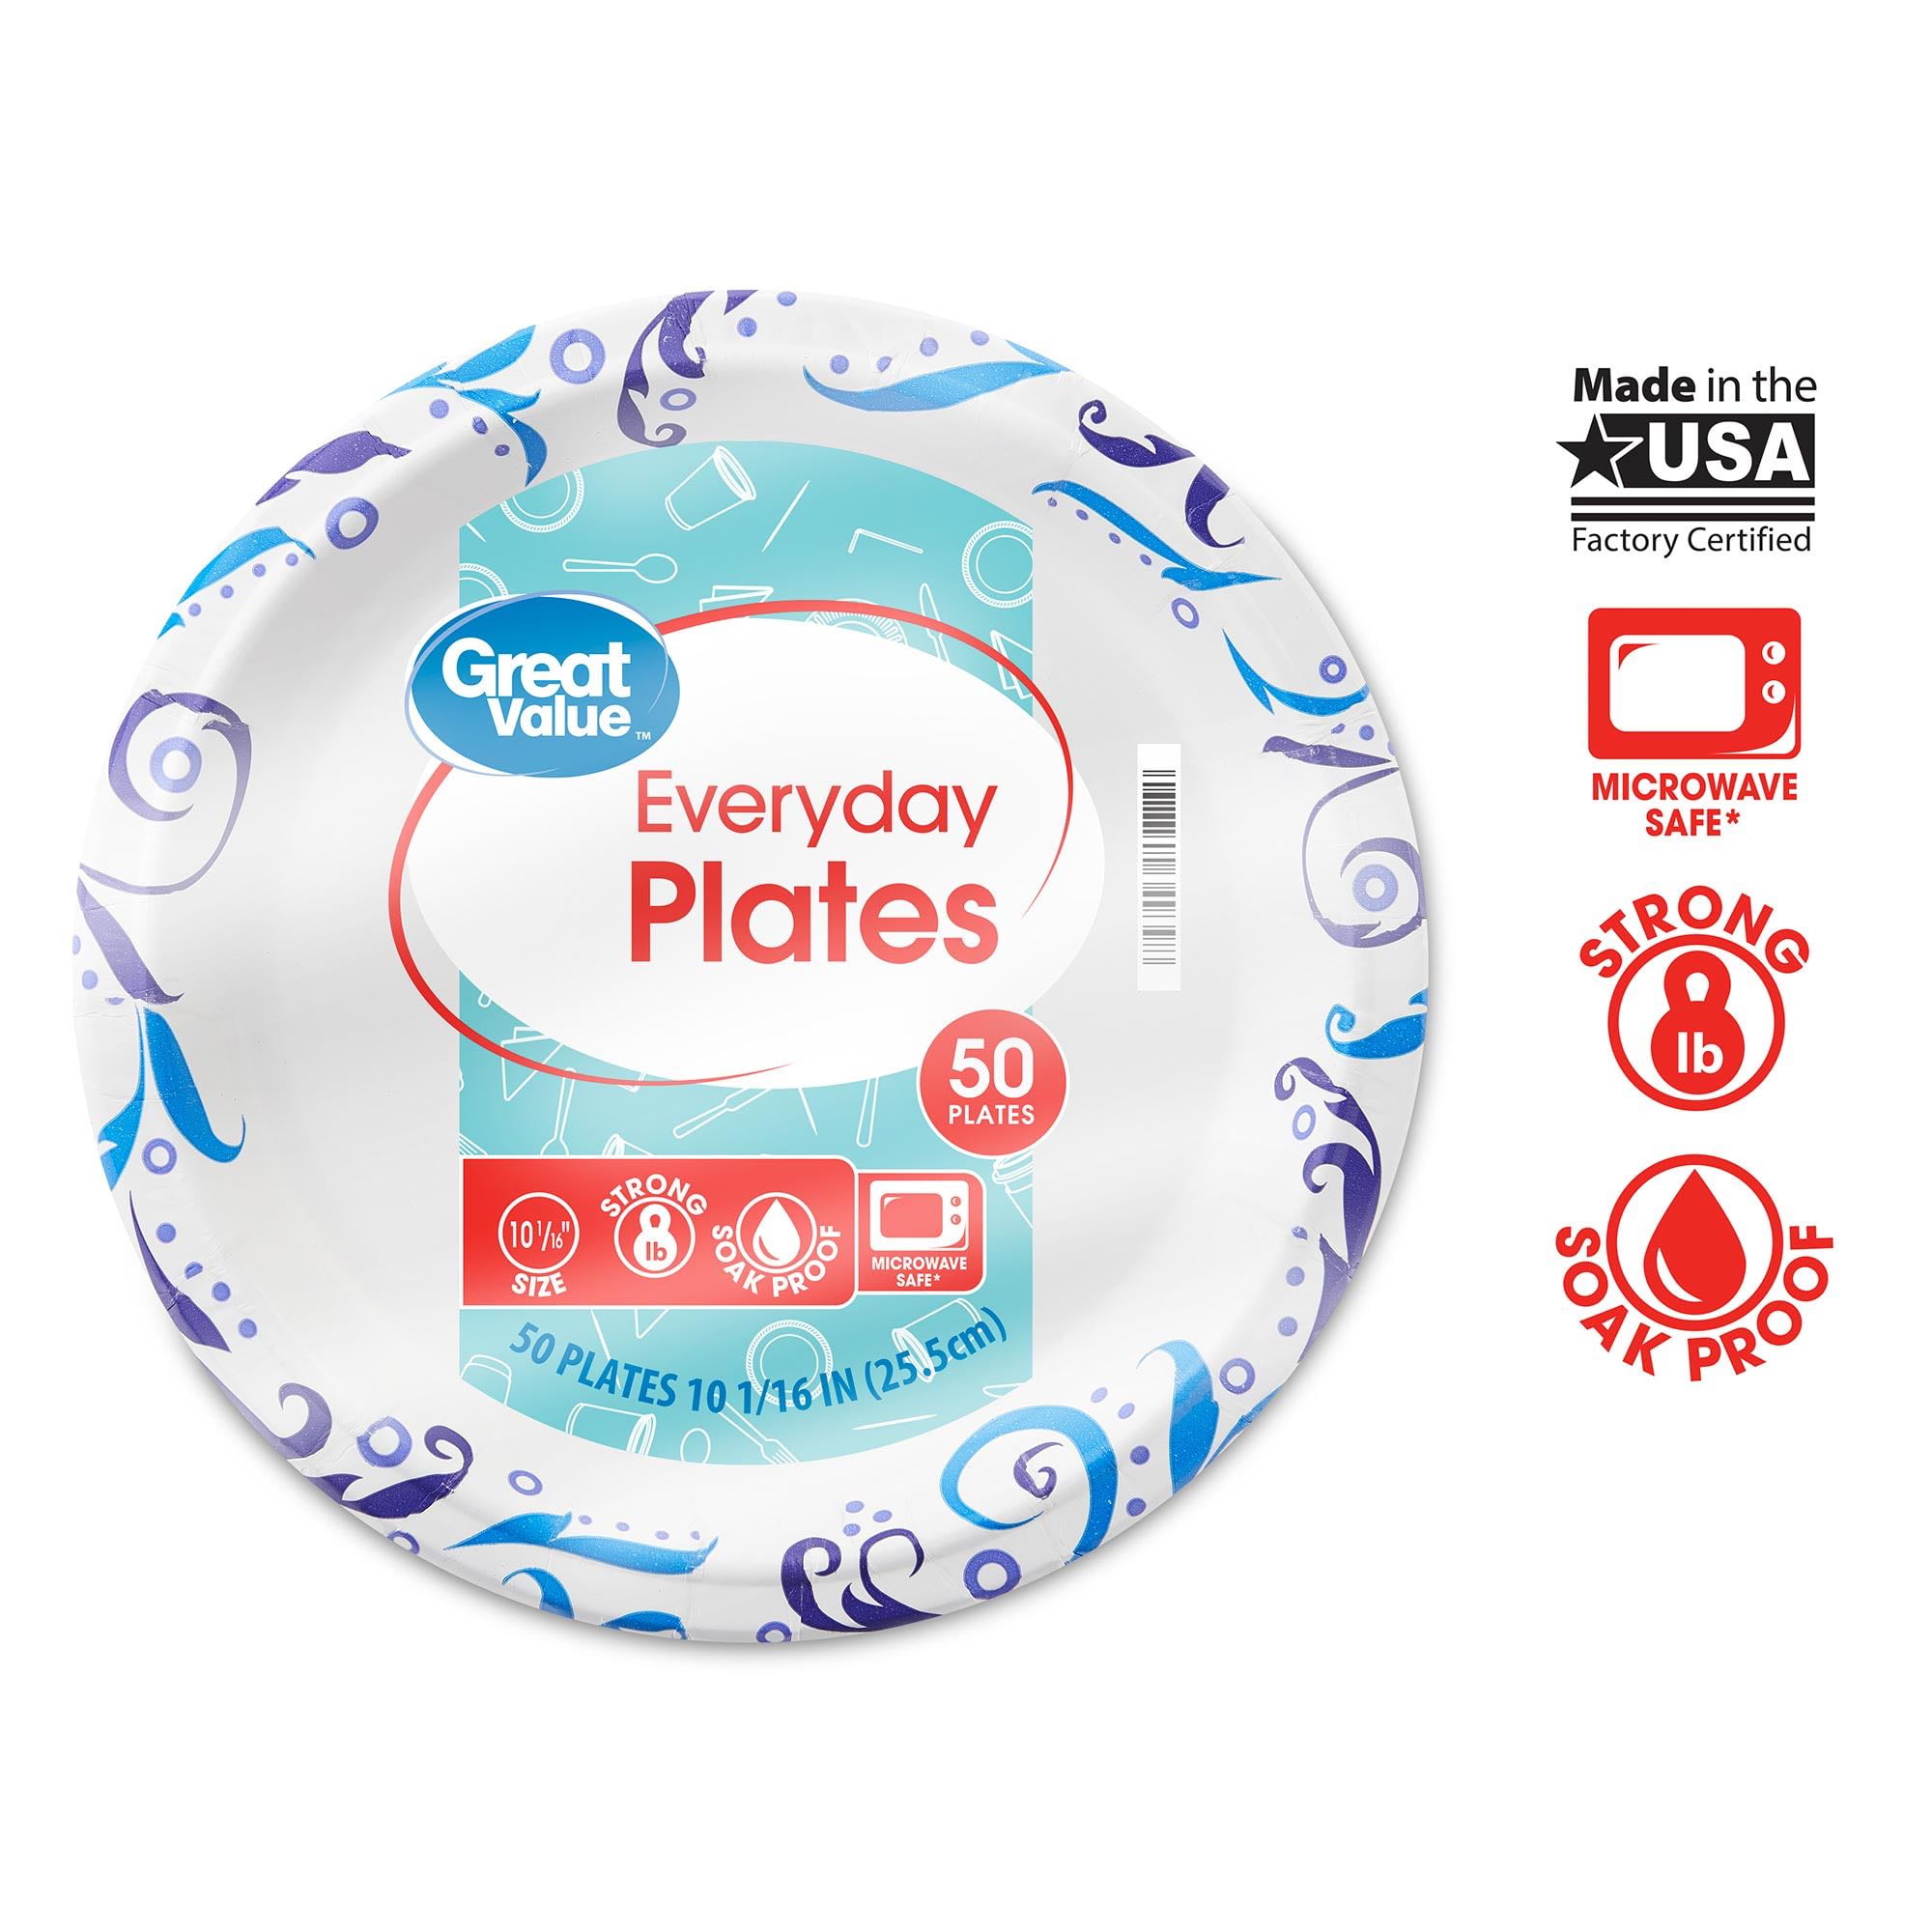 Great Value Economy 6 Paper Plates, 90 count 